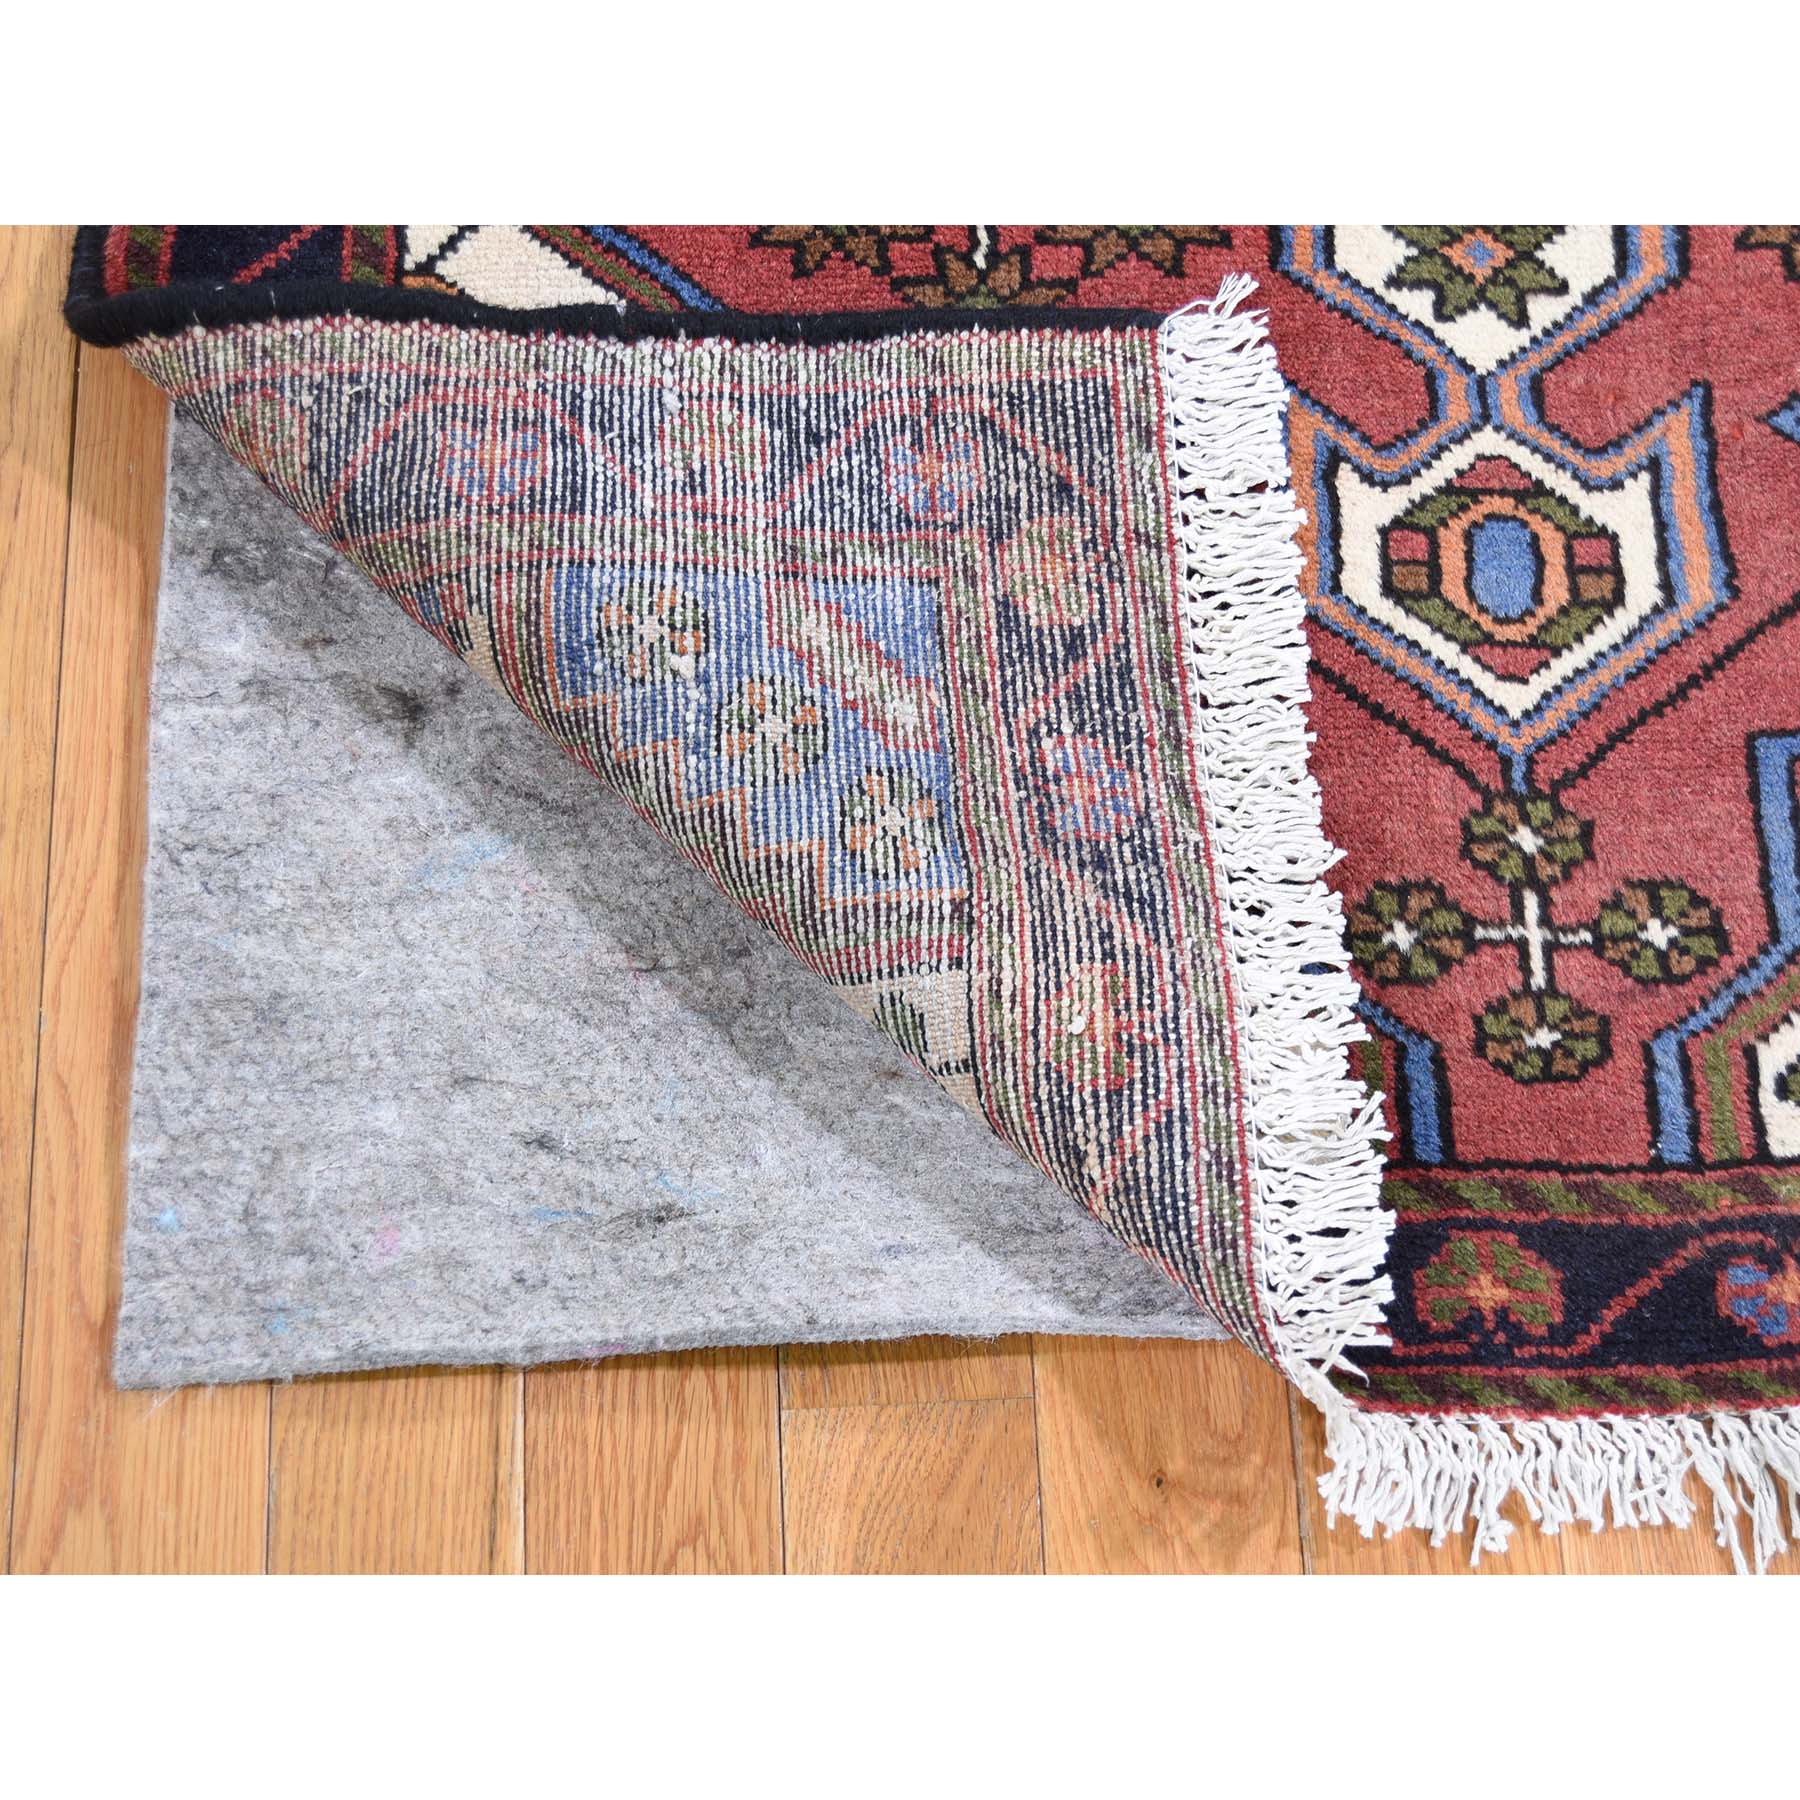 3-5 x5- Vintage Bohemian Red Persian Hamadan Pure Wool Hand-Knotted Oriental Rug 